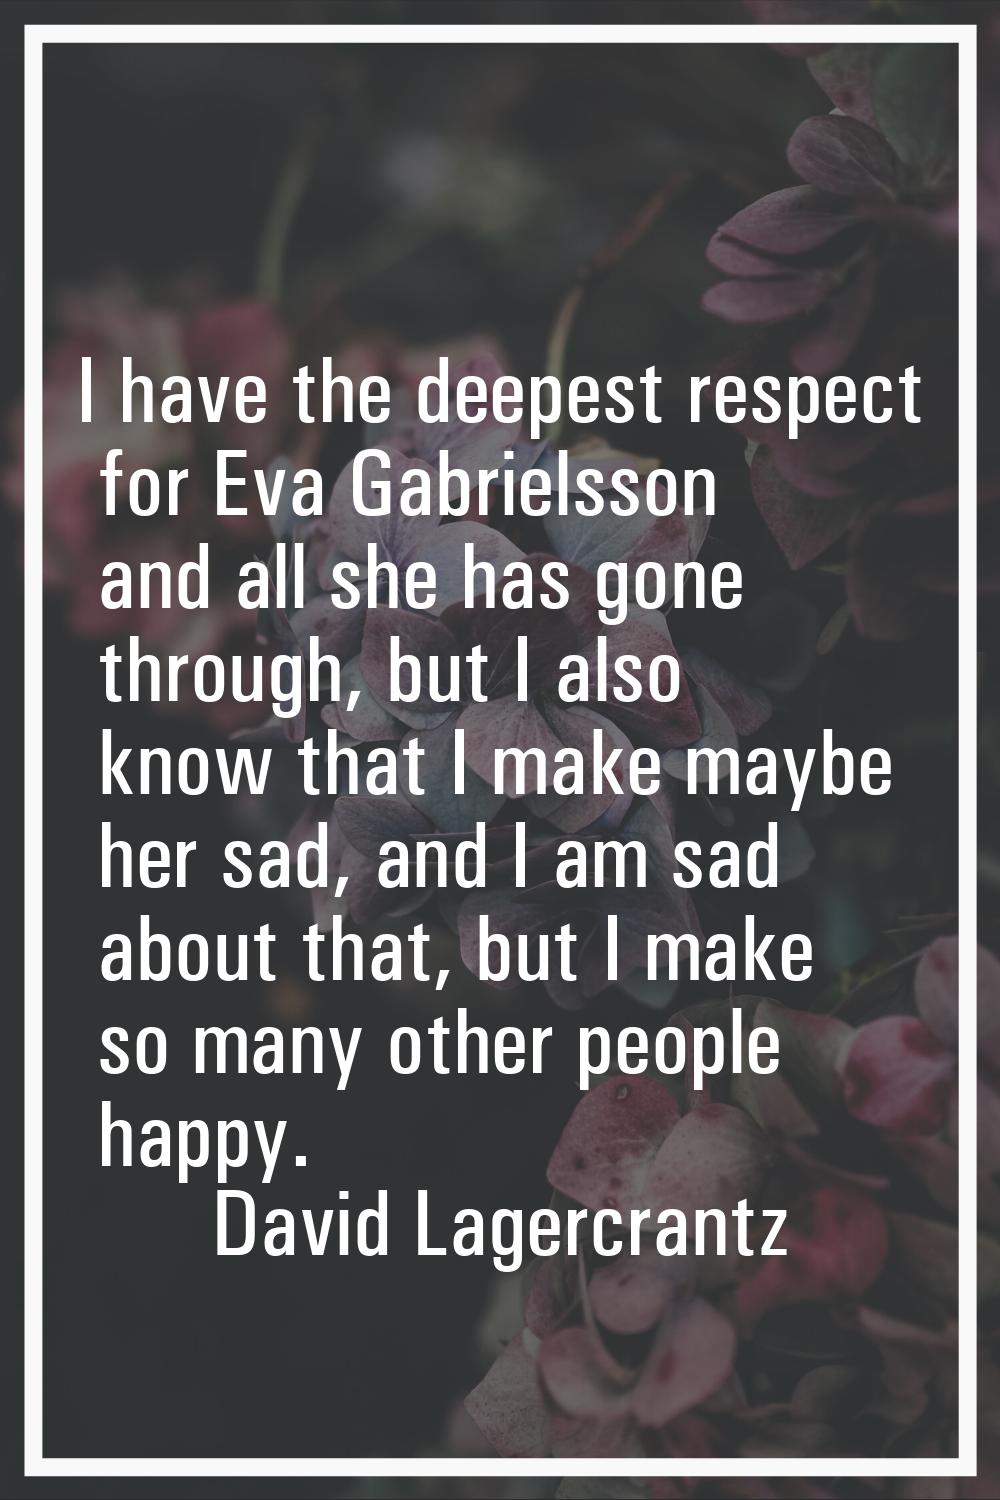 I have the deepest respect for Eva Gabrielsson and all she has gone through, but I also know that I